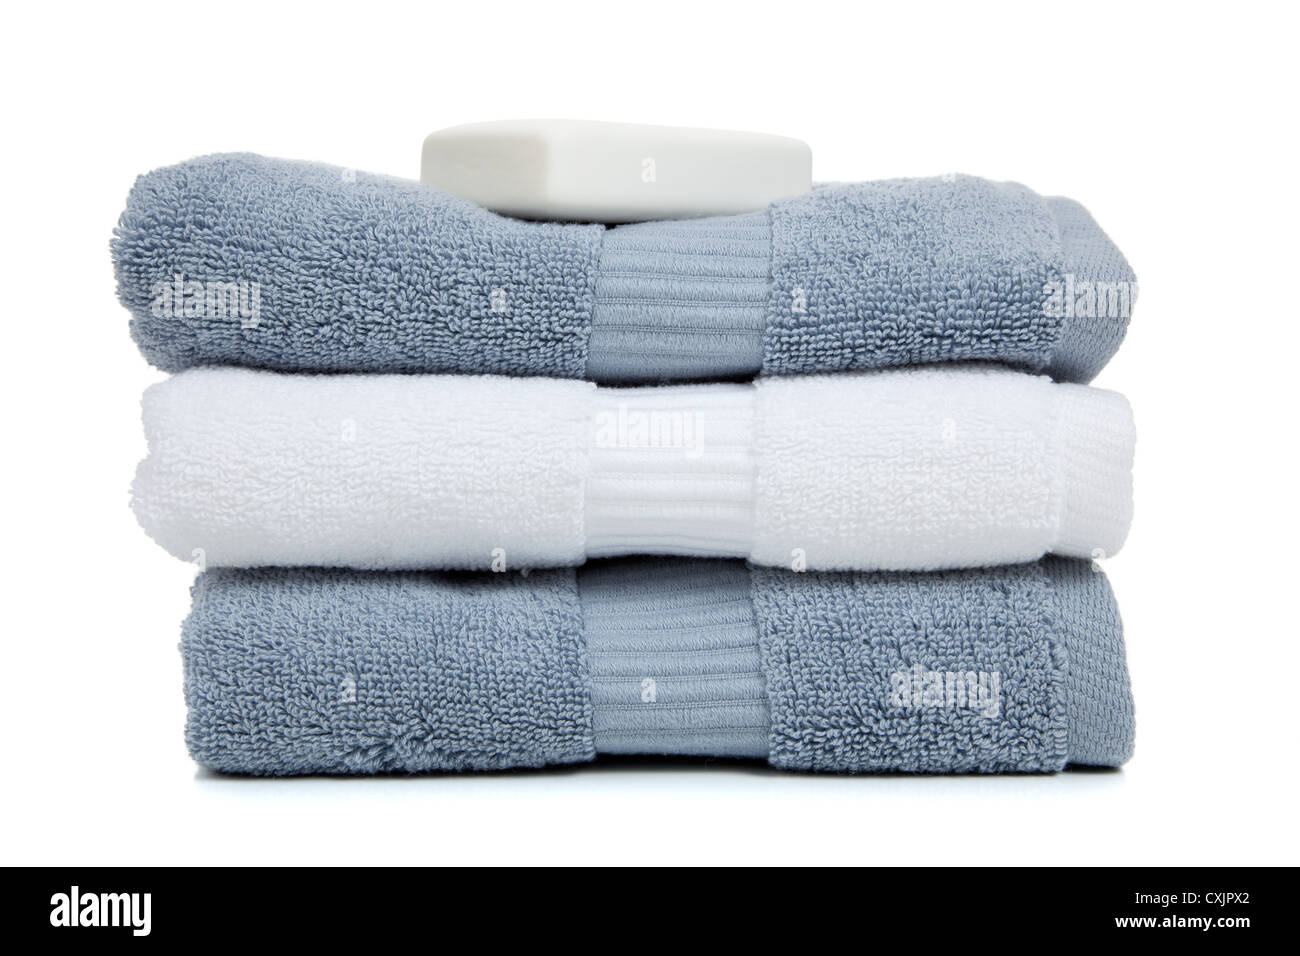 Stack of gray and white towels and a bar of soap on a white background Stock Photo